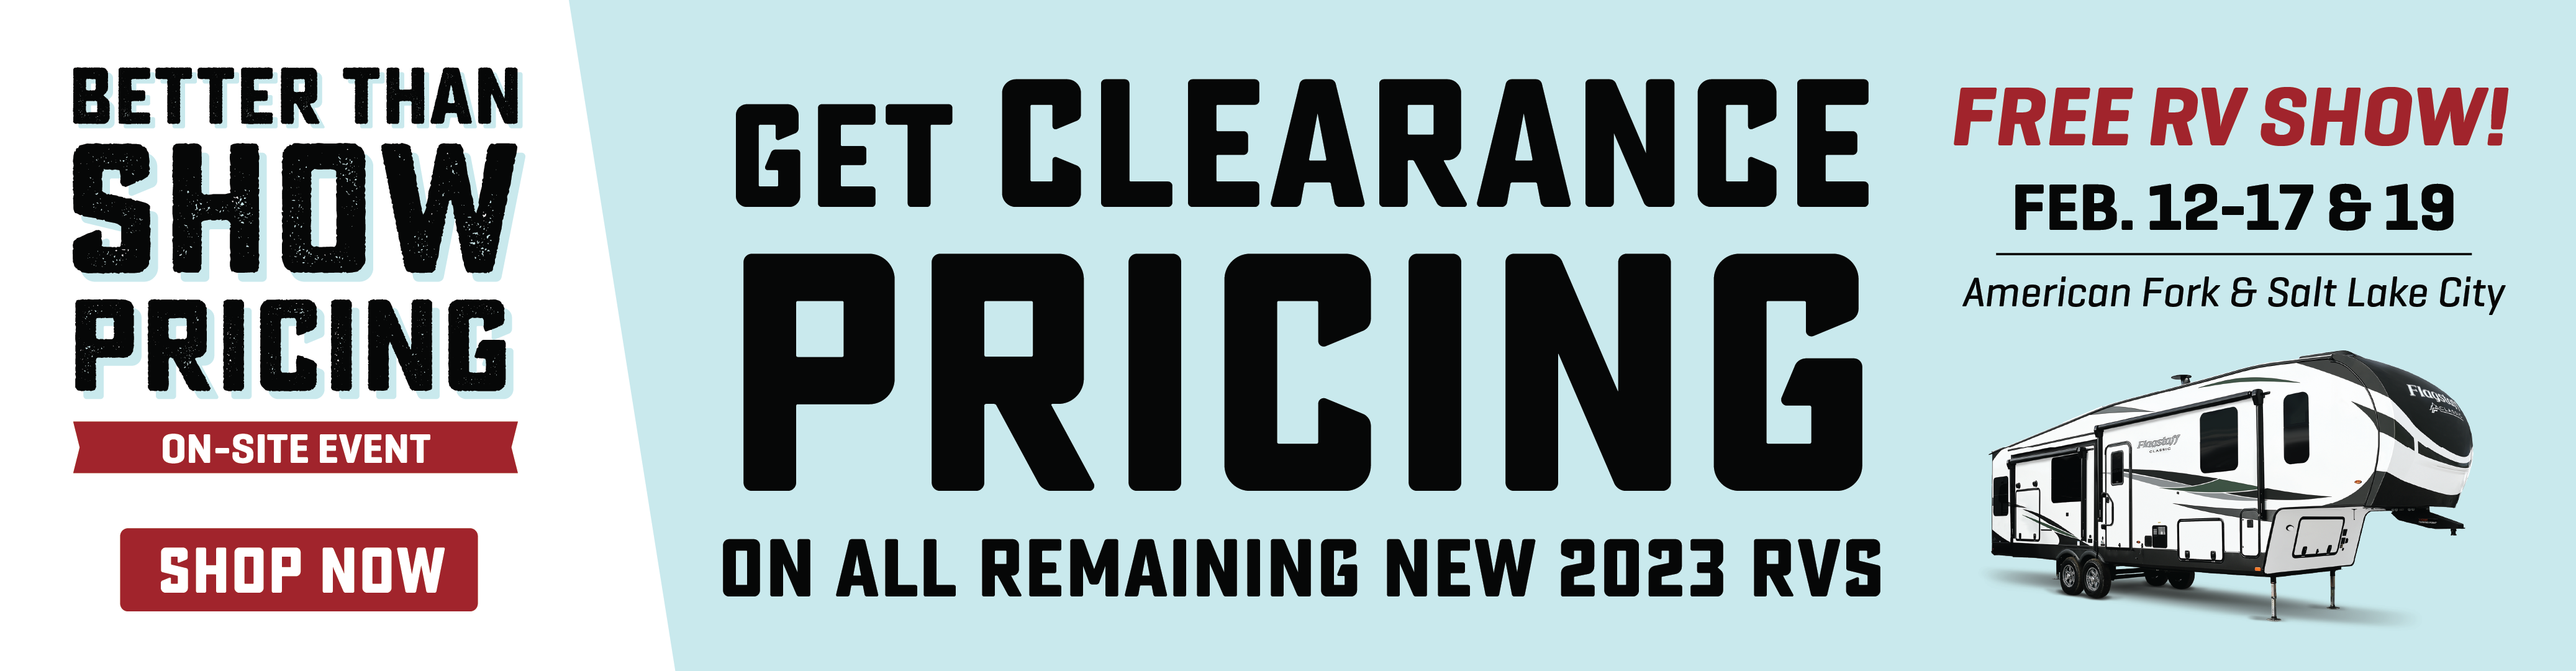 Clearance Pricing on all remaining new 2023 RVs - Better Than Show Pricing On-Site Event - Feb. 12-17 & 19, 2024 - Bish's RV of American Fork, UT and Salt Lake City, UT